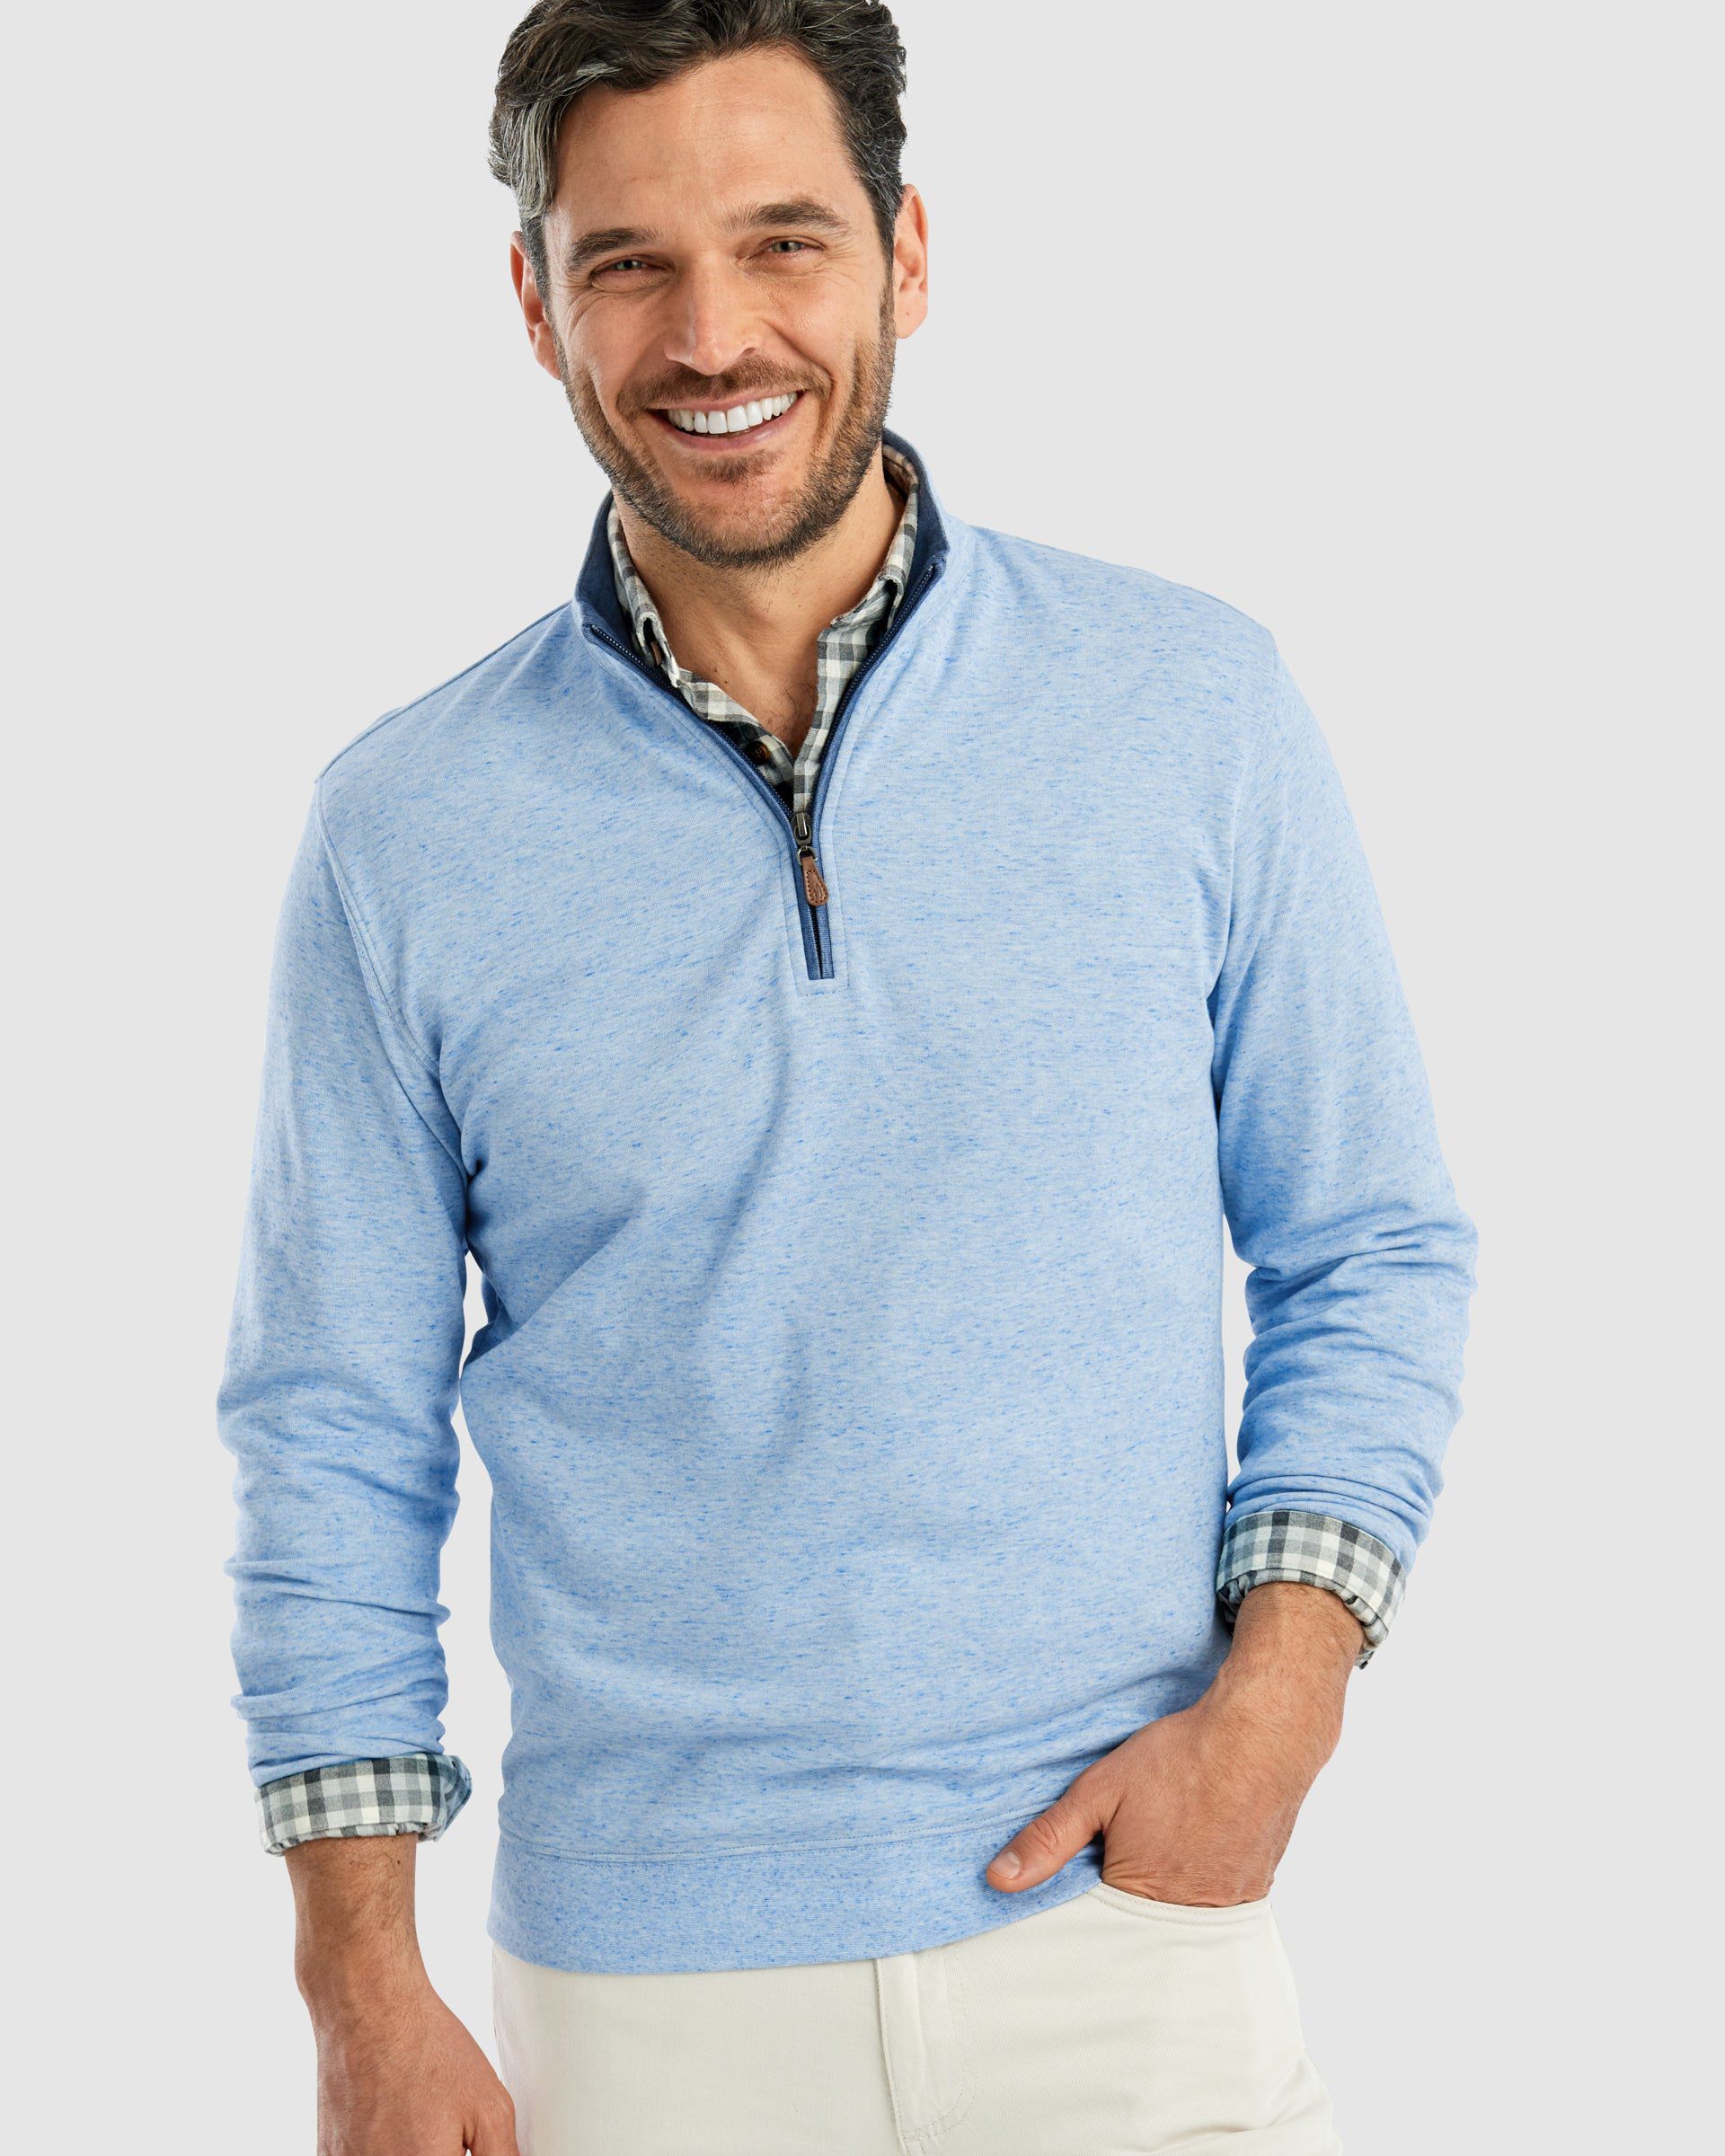 Men's 1/4 Zip Pullover - Business Casual Sweater · johnnie-O